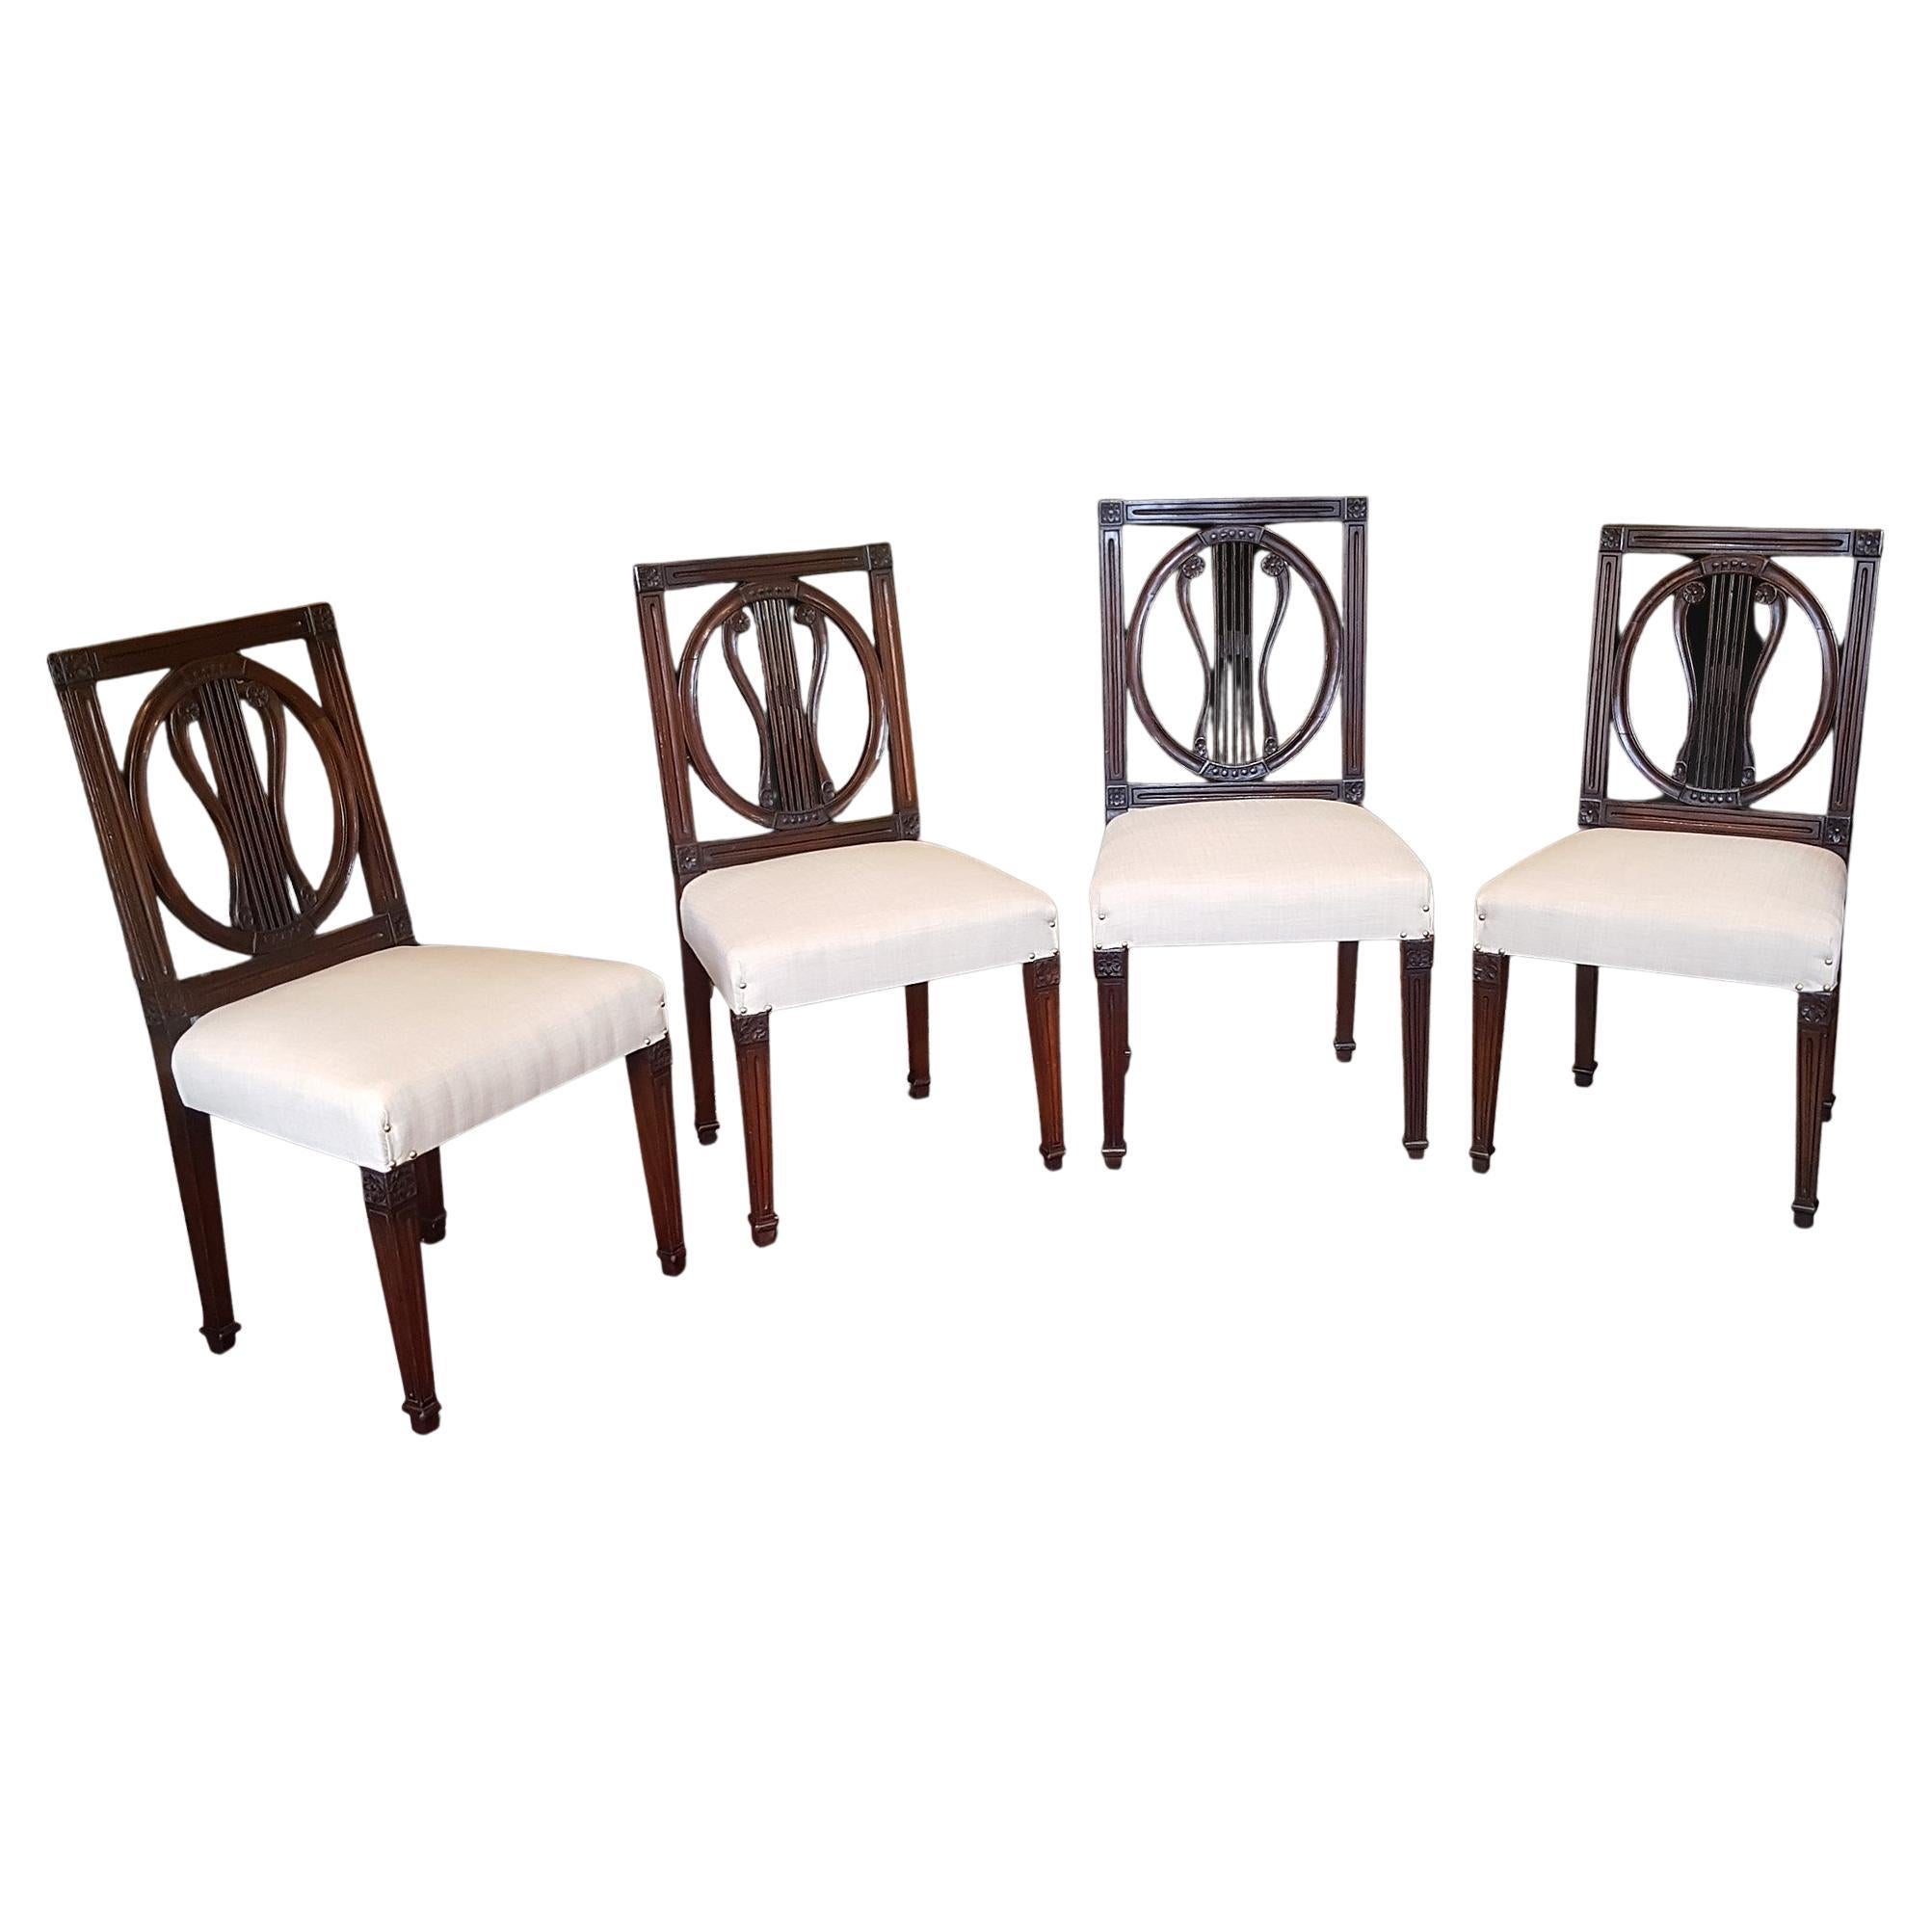 Set of 4 Regency Mahogany Chairs with Lyre Style Bac For Sale